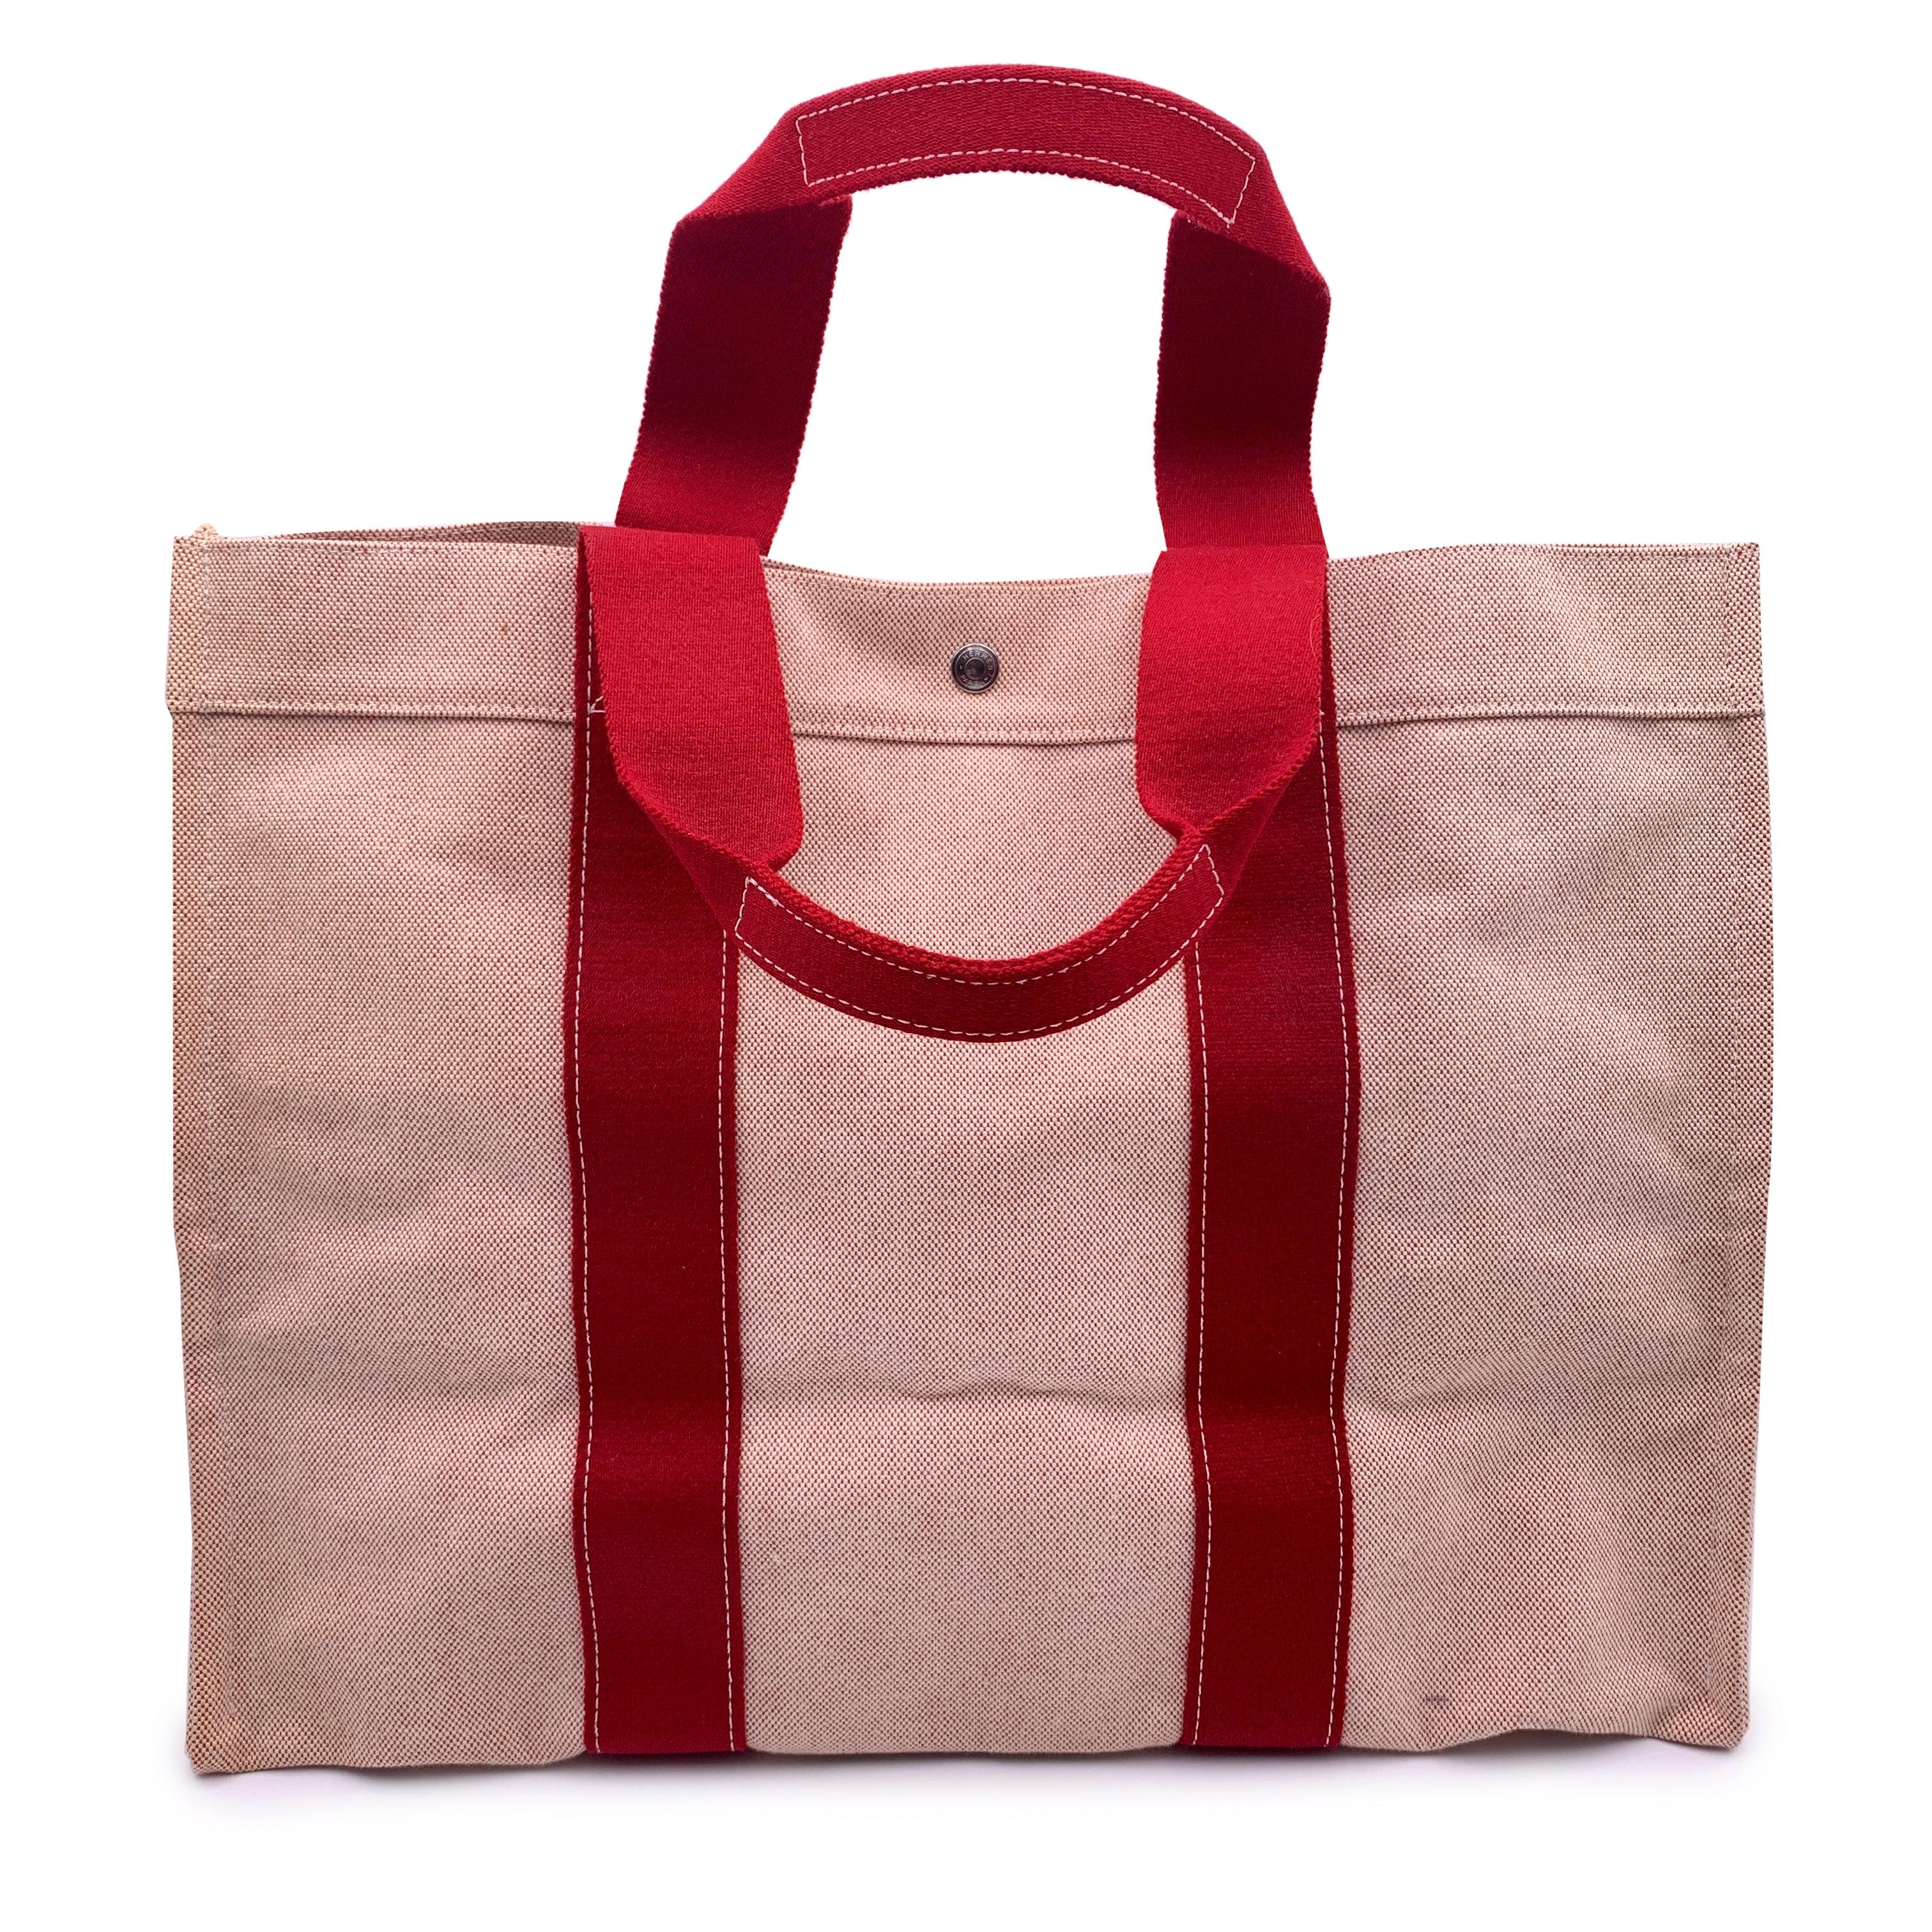 Hermes Paris Beige Red Canvas Bora Bora GM Tote Beach Bag In Excellent Condition For Sale In Rome, Rome